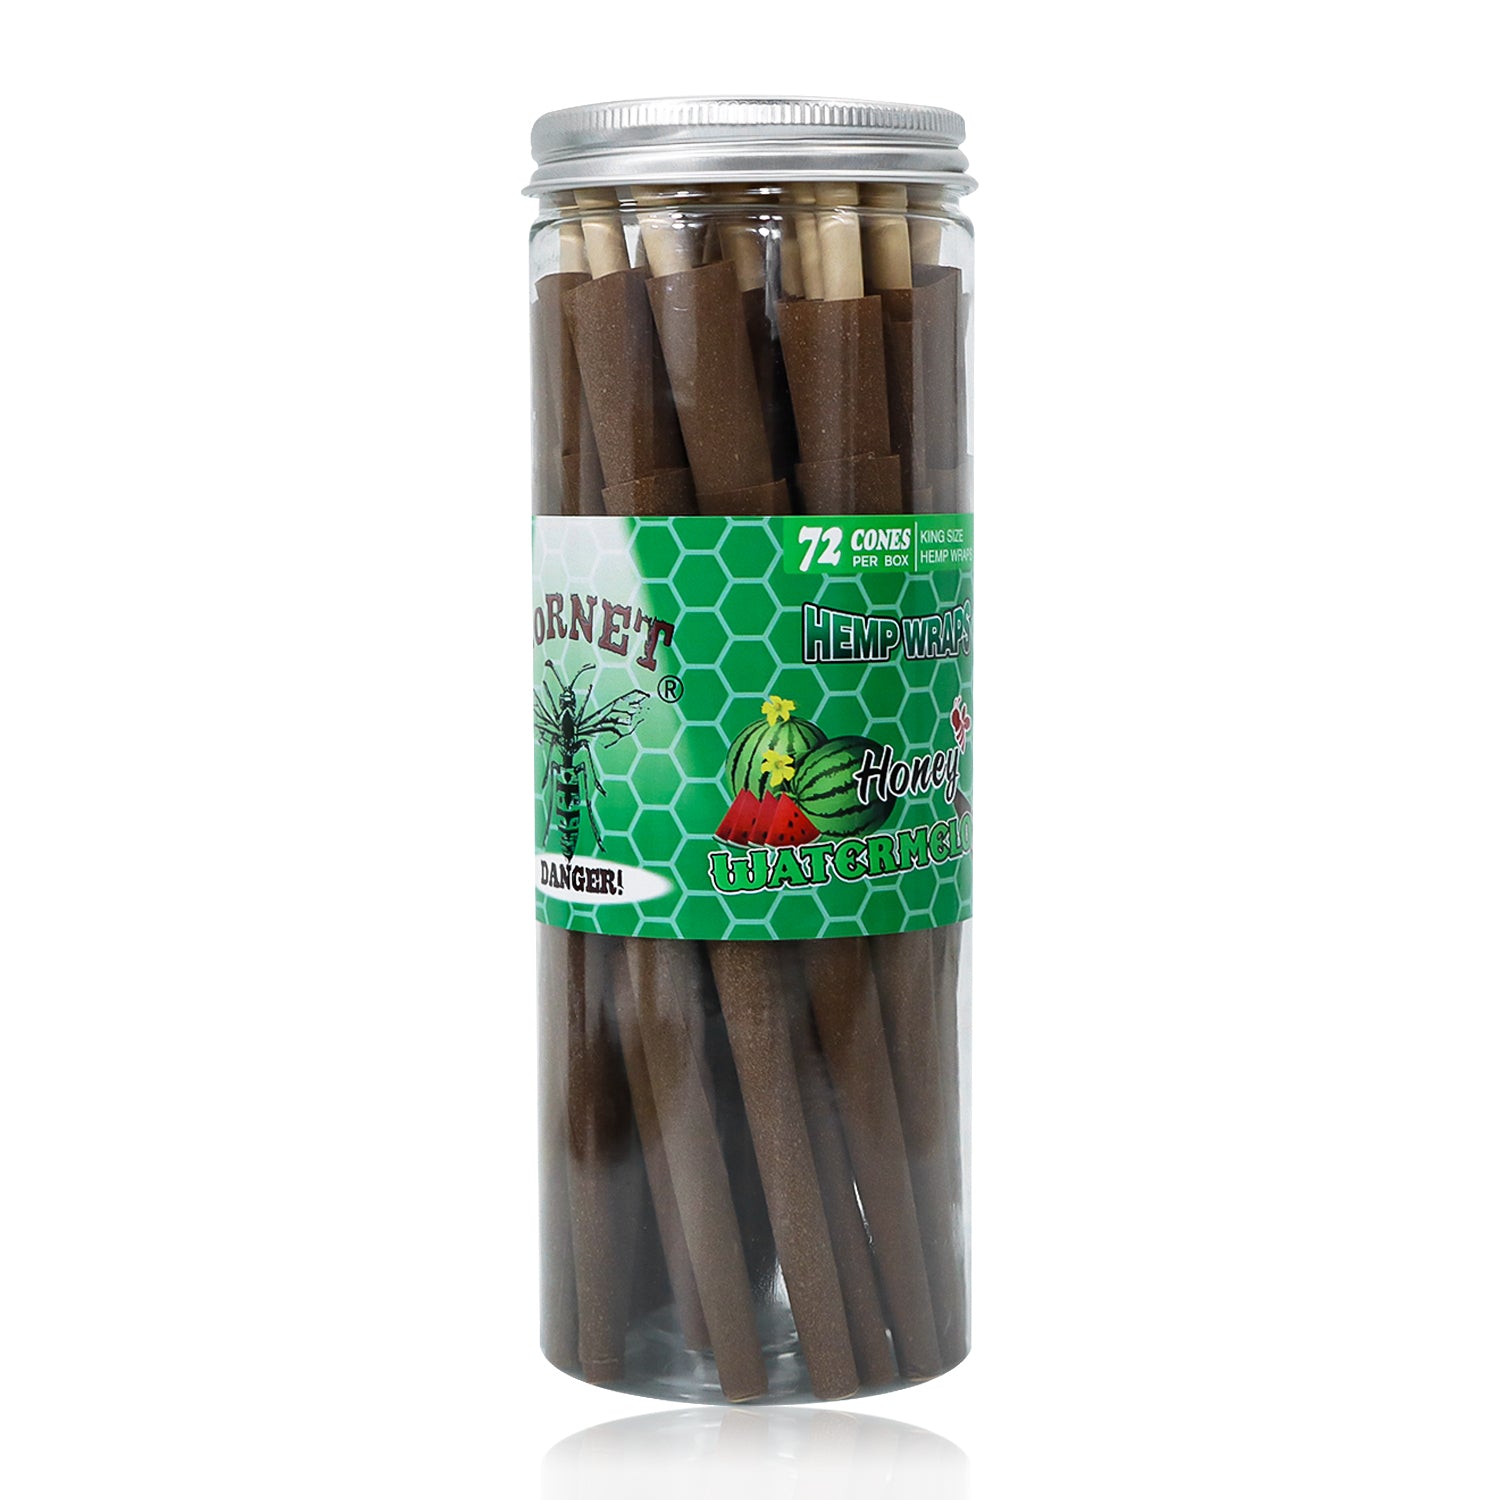 HORNET Watermelon Flavored Brown Pre Rolled Cones, King Size Pre Rolled Rolling Paper with tips, Slow Burning Rolling Cones & load, 72 PCS / Jar